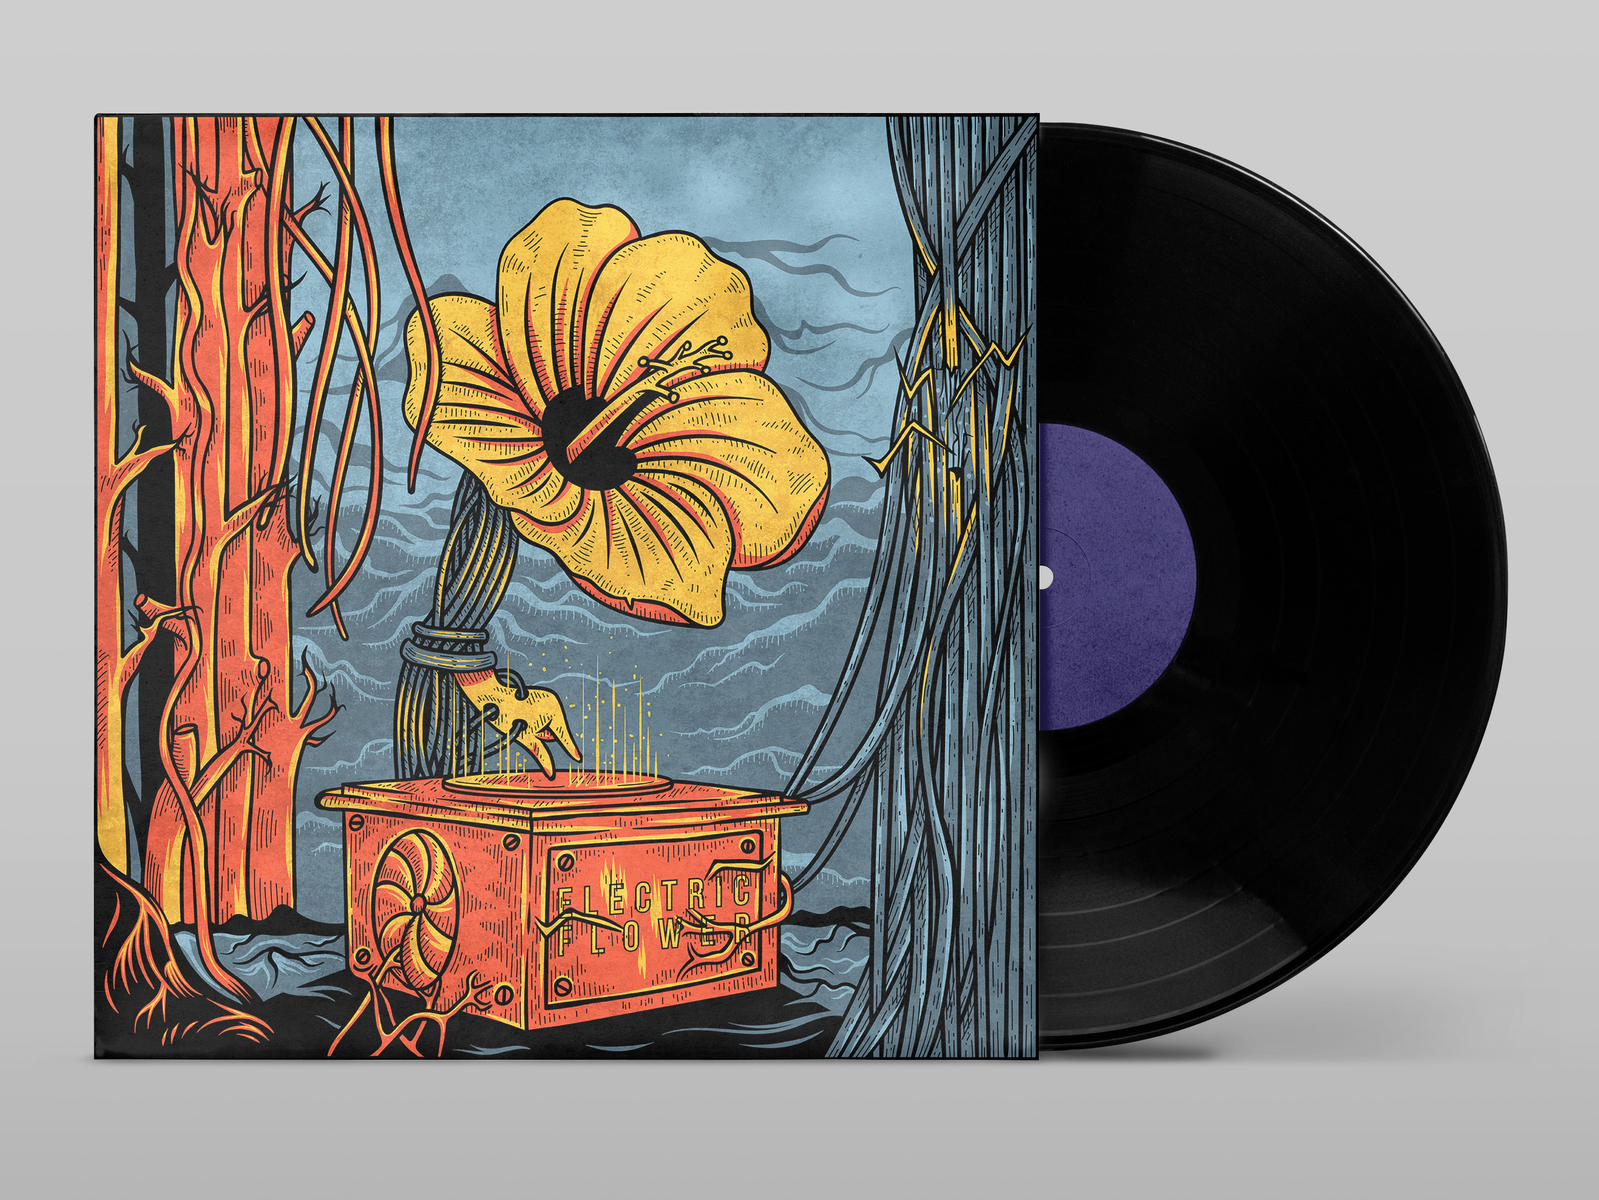 album Cover illustration by Panji Putra on Dribbble